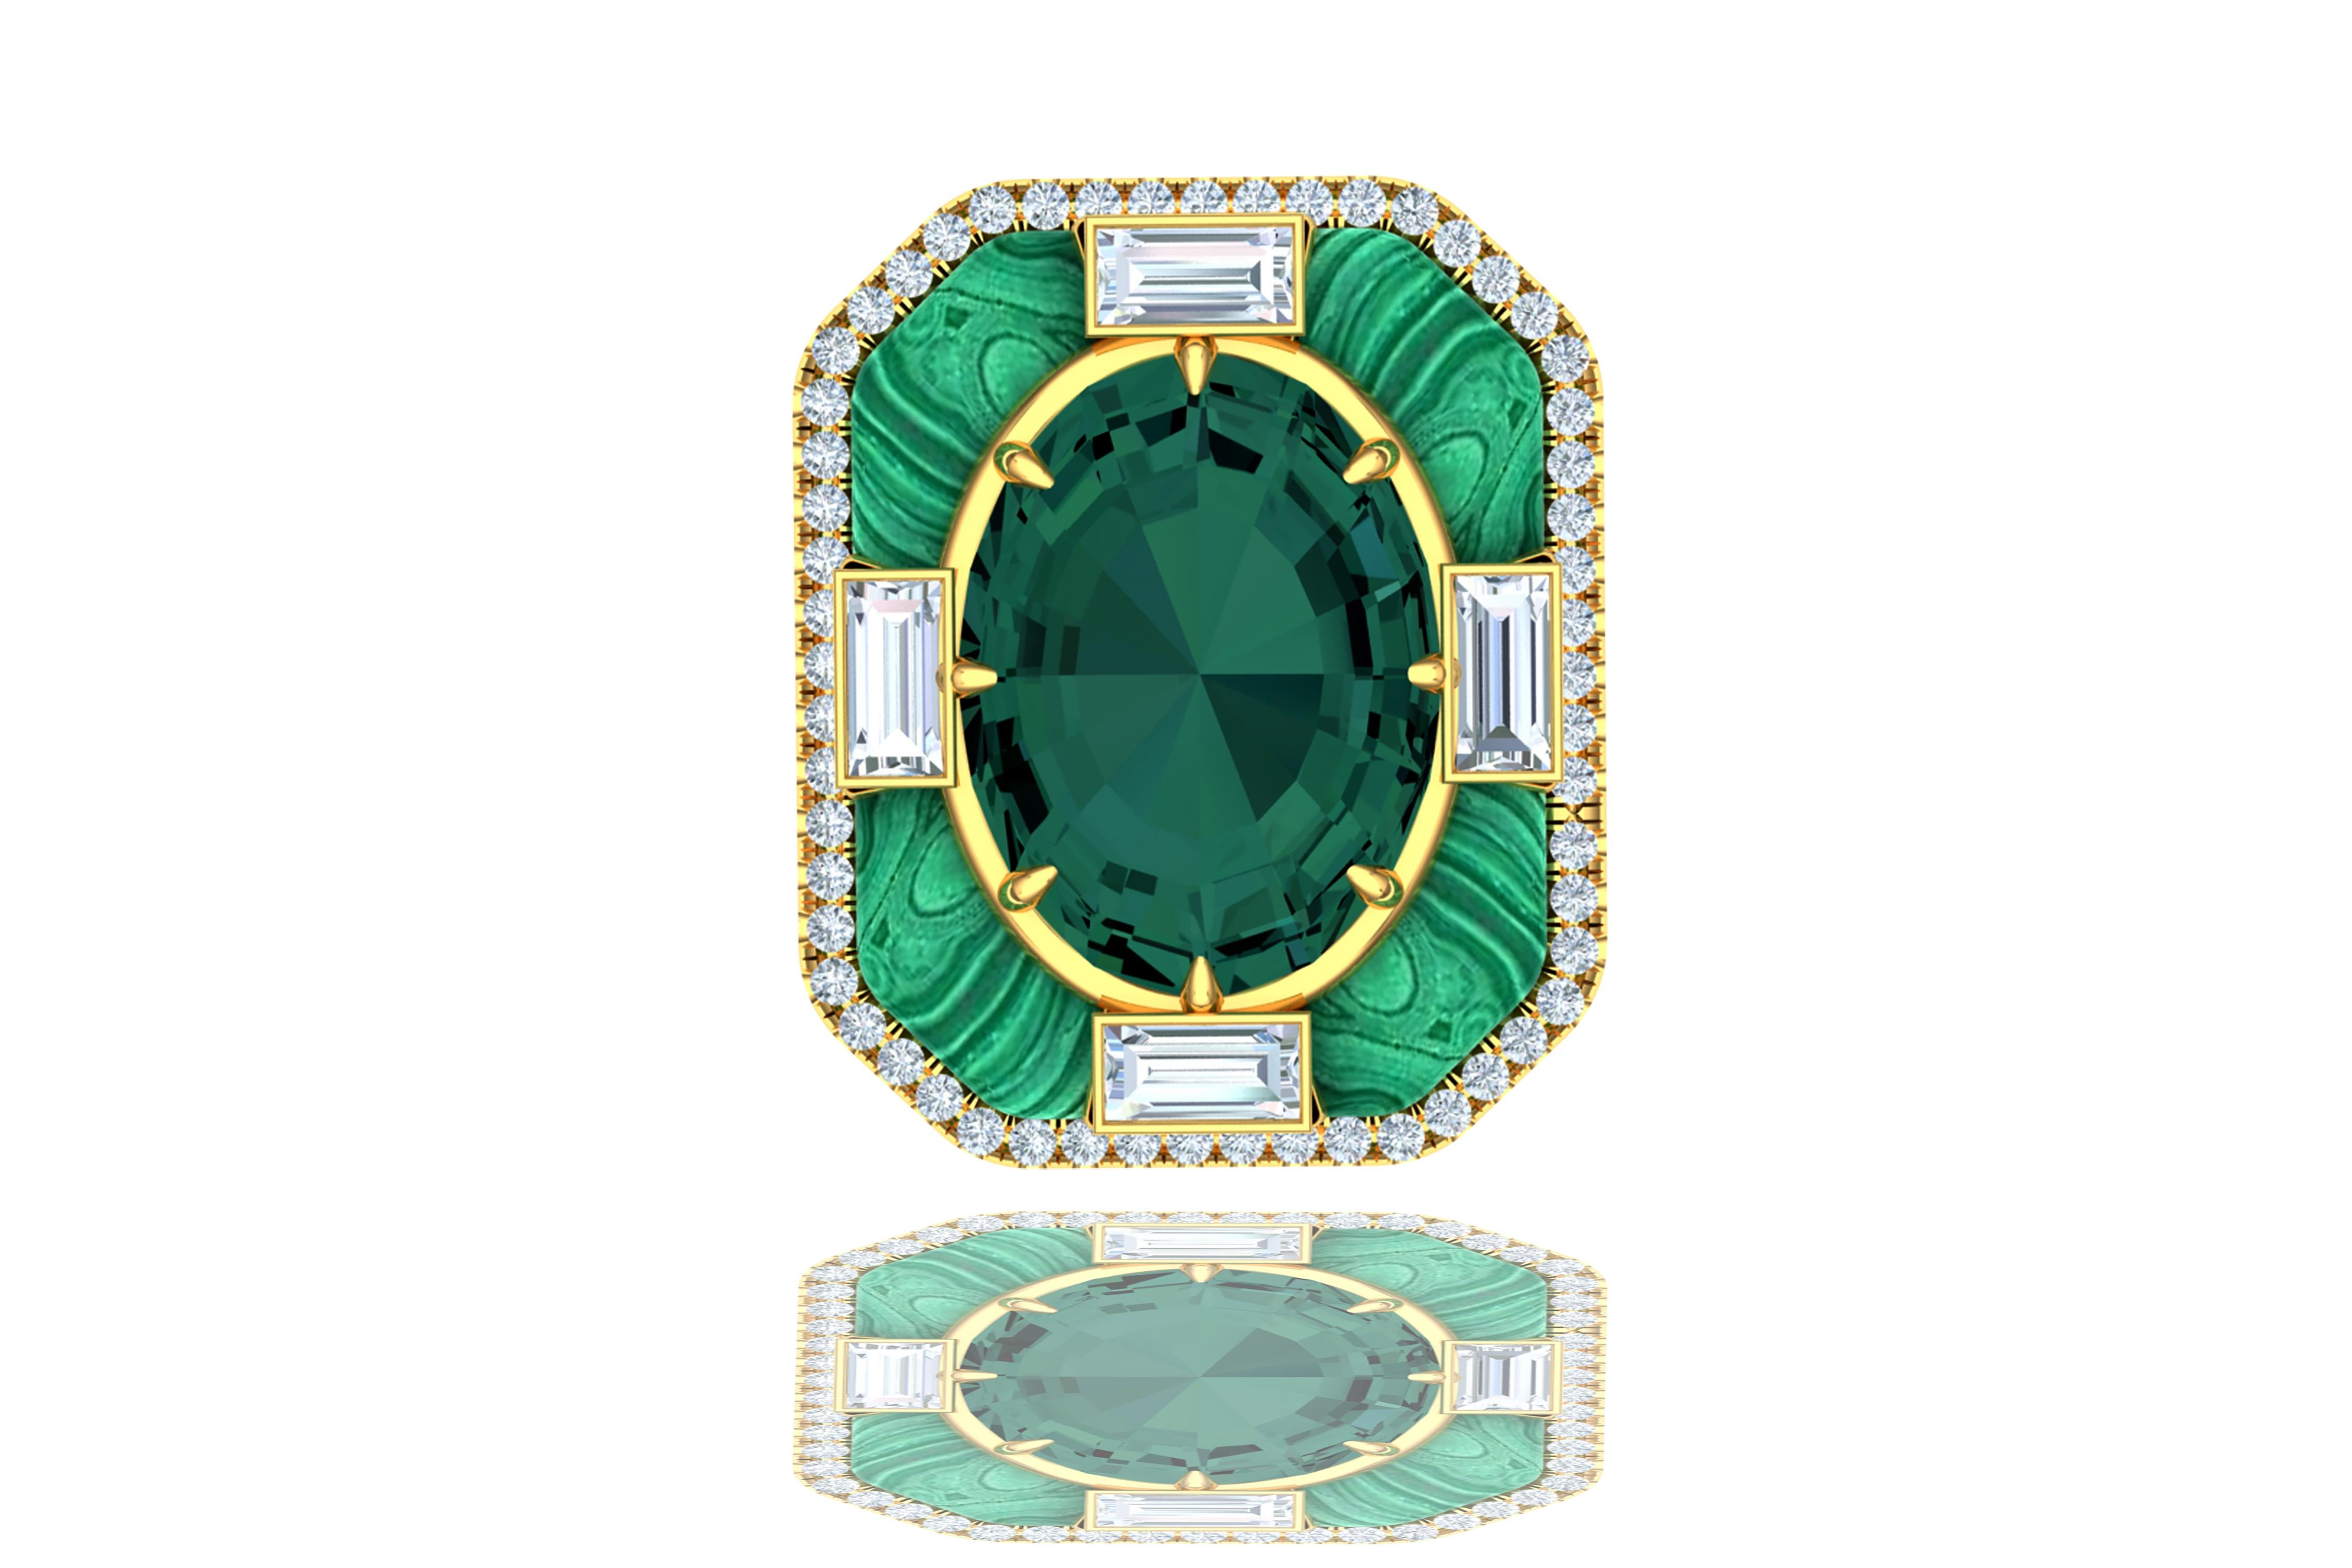 A stunning example of expertly crafted one a kind jewelry using stones that usually are not put together.  This ring displays a stunning oval cut tourmaline that's a perfect blue green color and SI clarity.  The center stone is complimented by